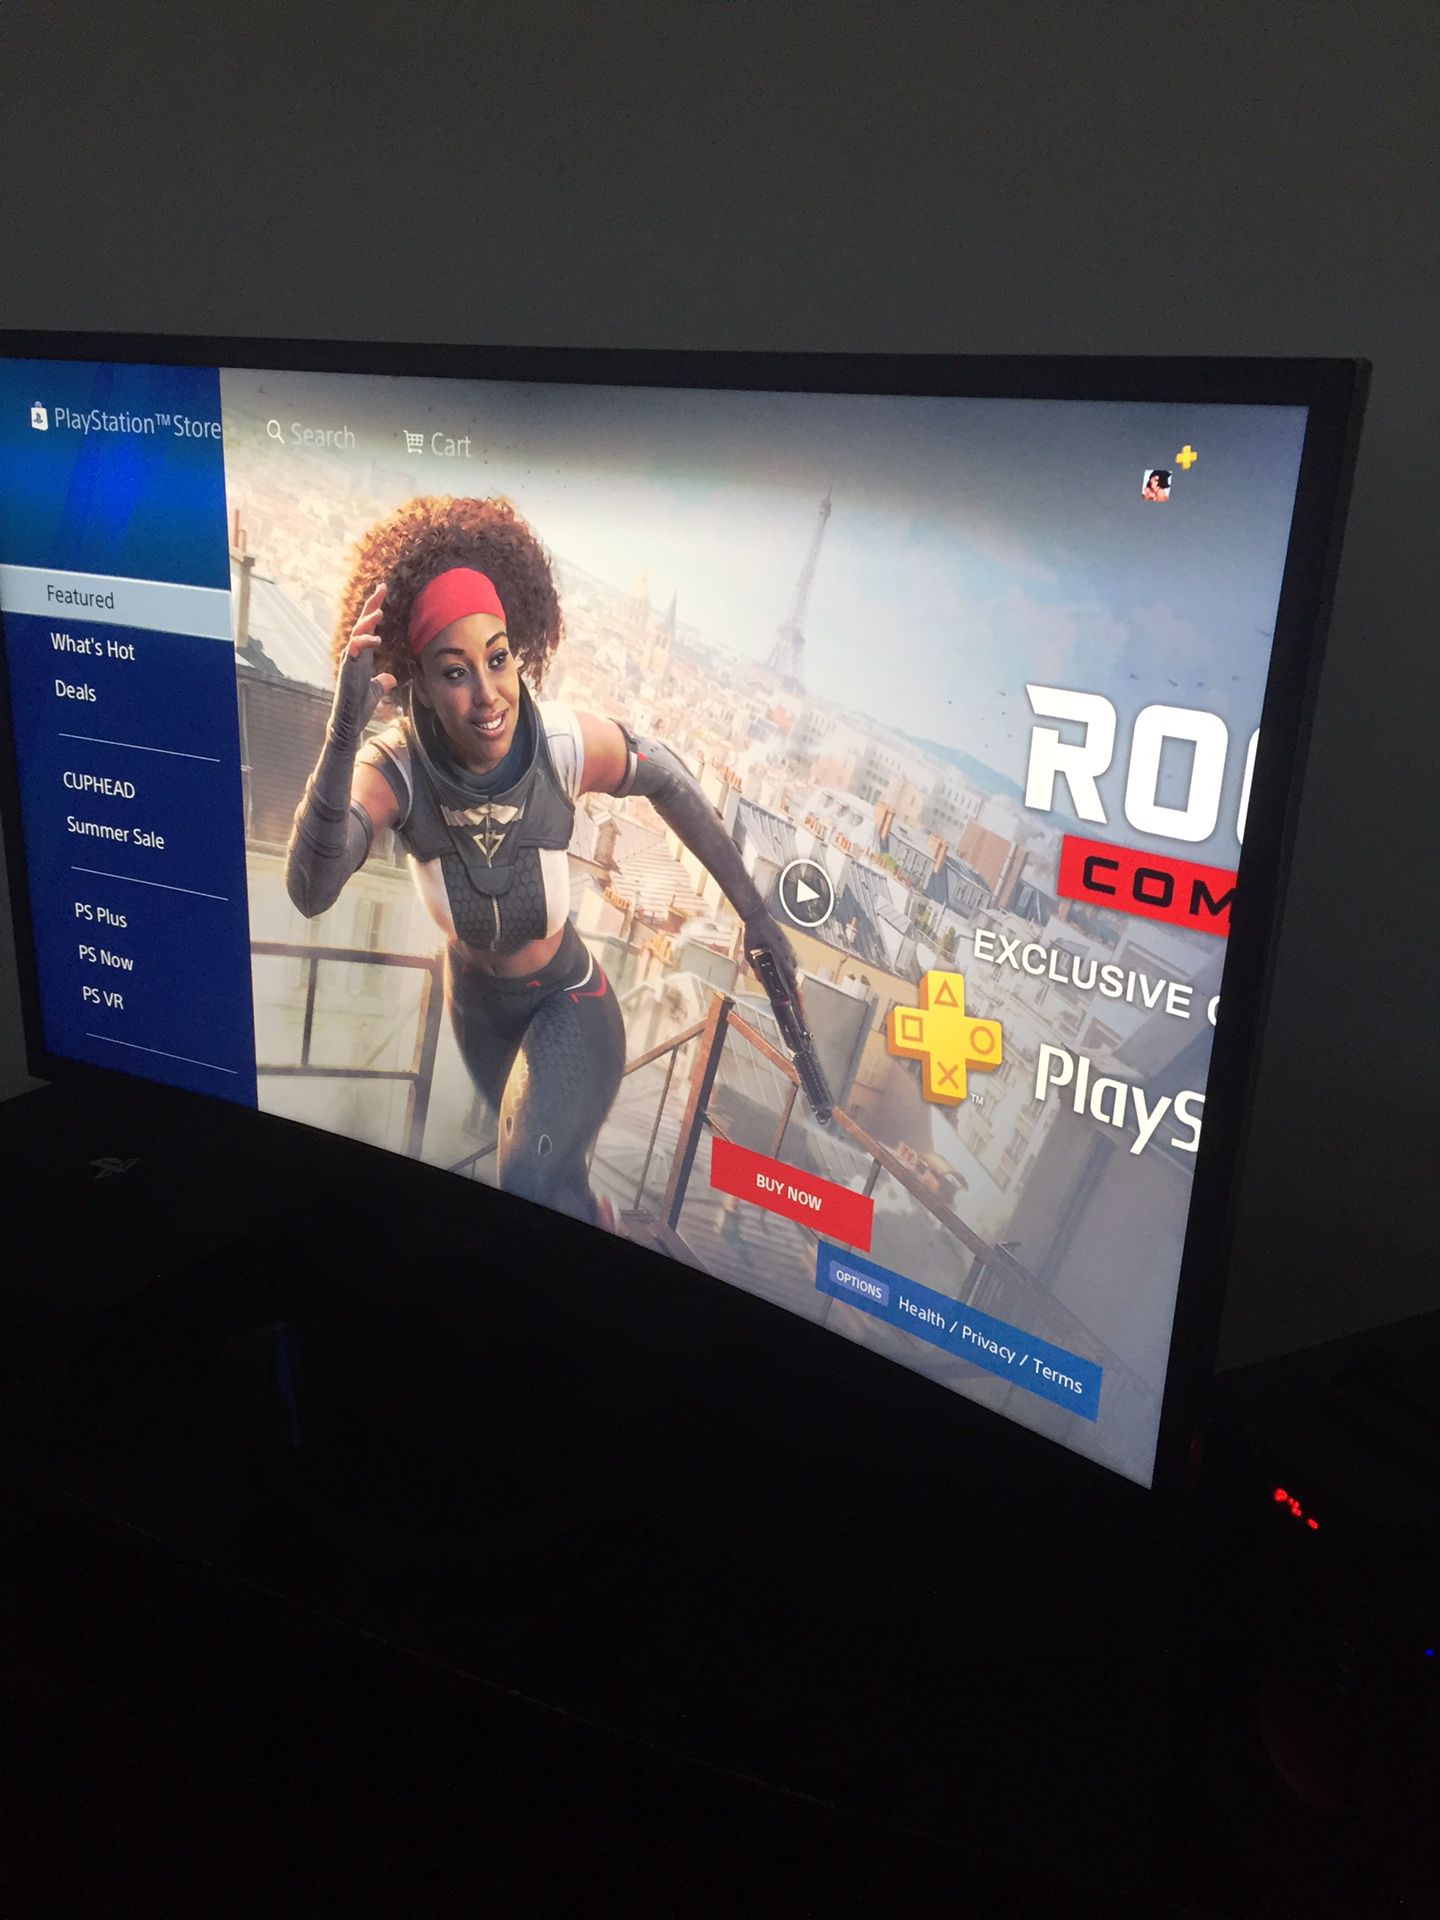 Samsung 32” curved 144hz gaming monitor